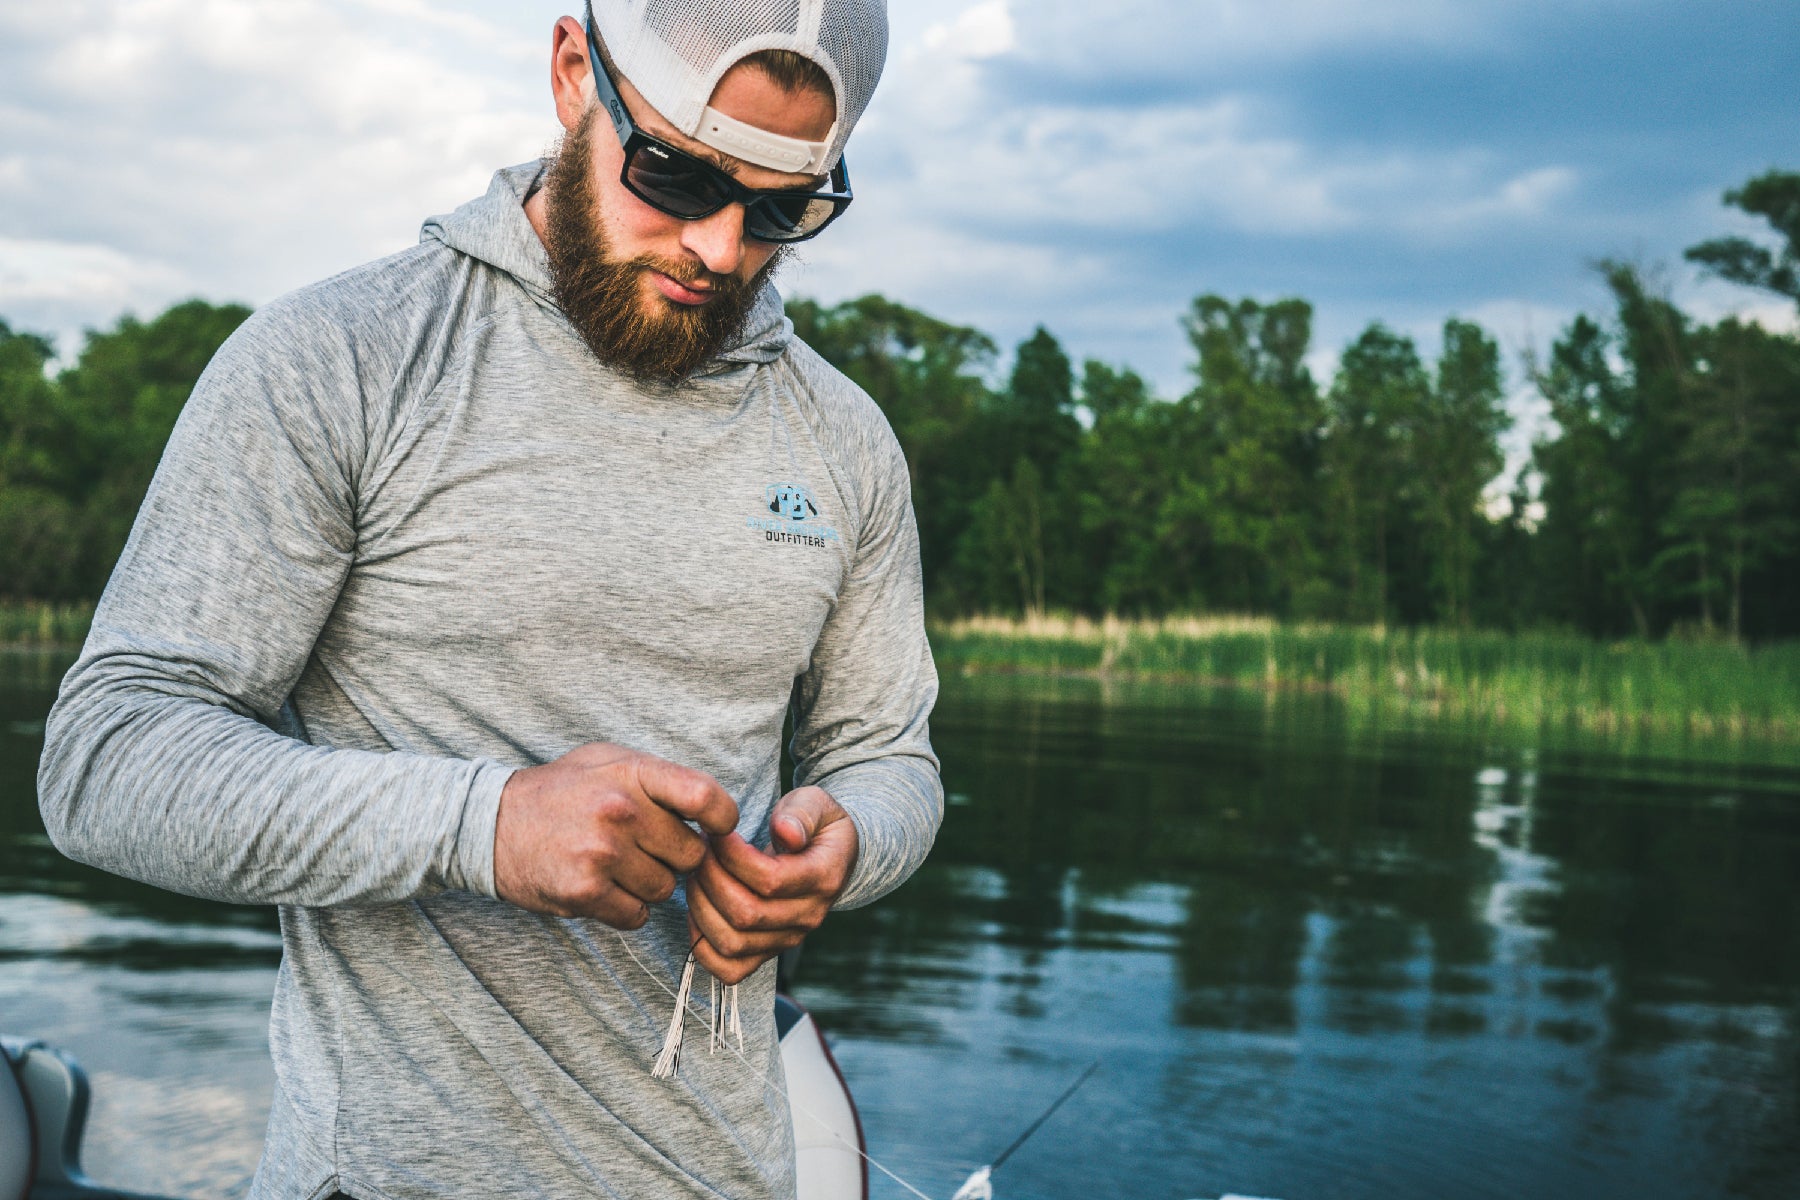 Fish North Hoodie – River Brothers Outfitters